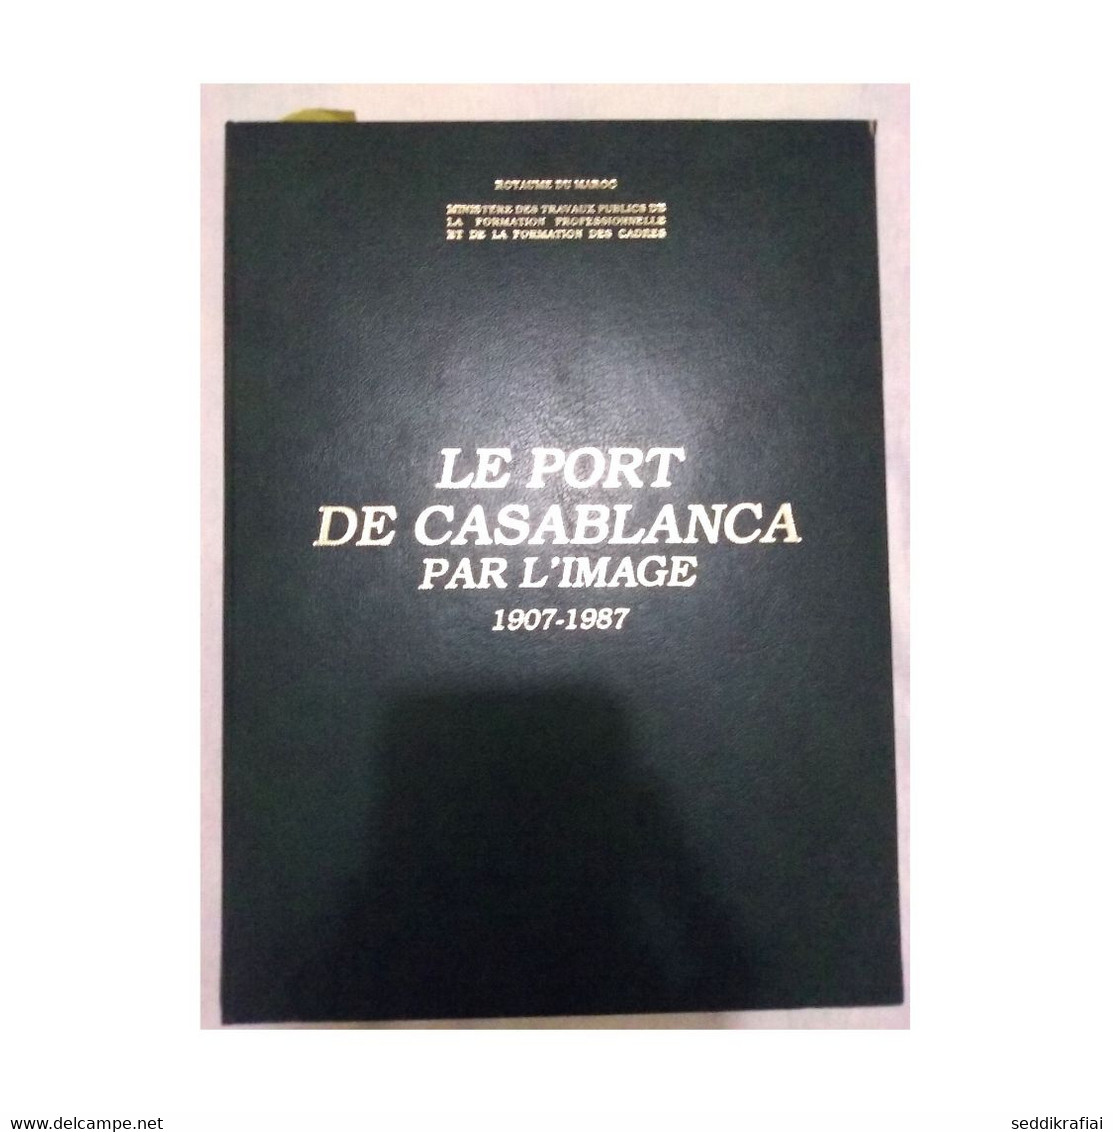 Vintage Morocco Book The Port Of Casablanca Binding Leather By The Image 1907-1987 Hassan 2 - Magazines & Catalogs